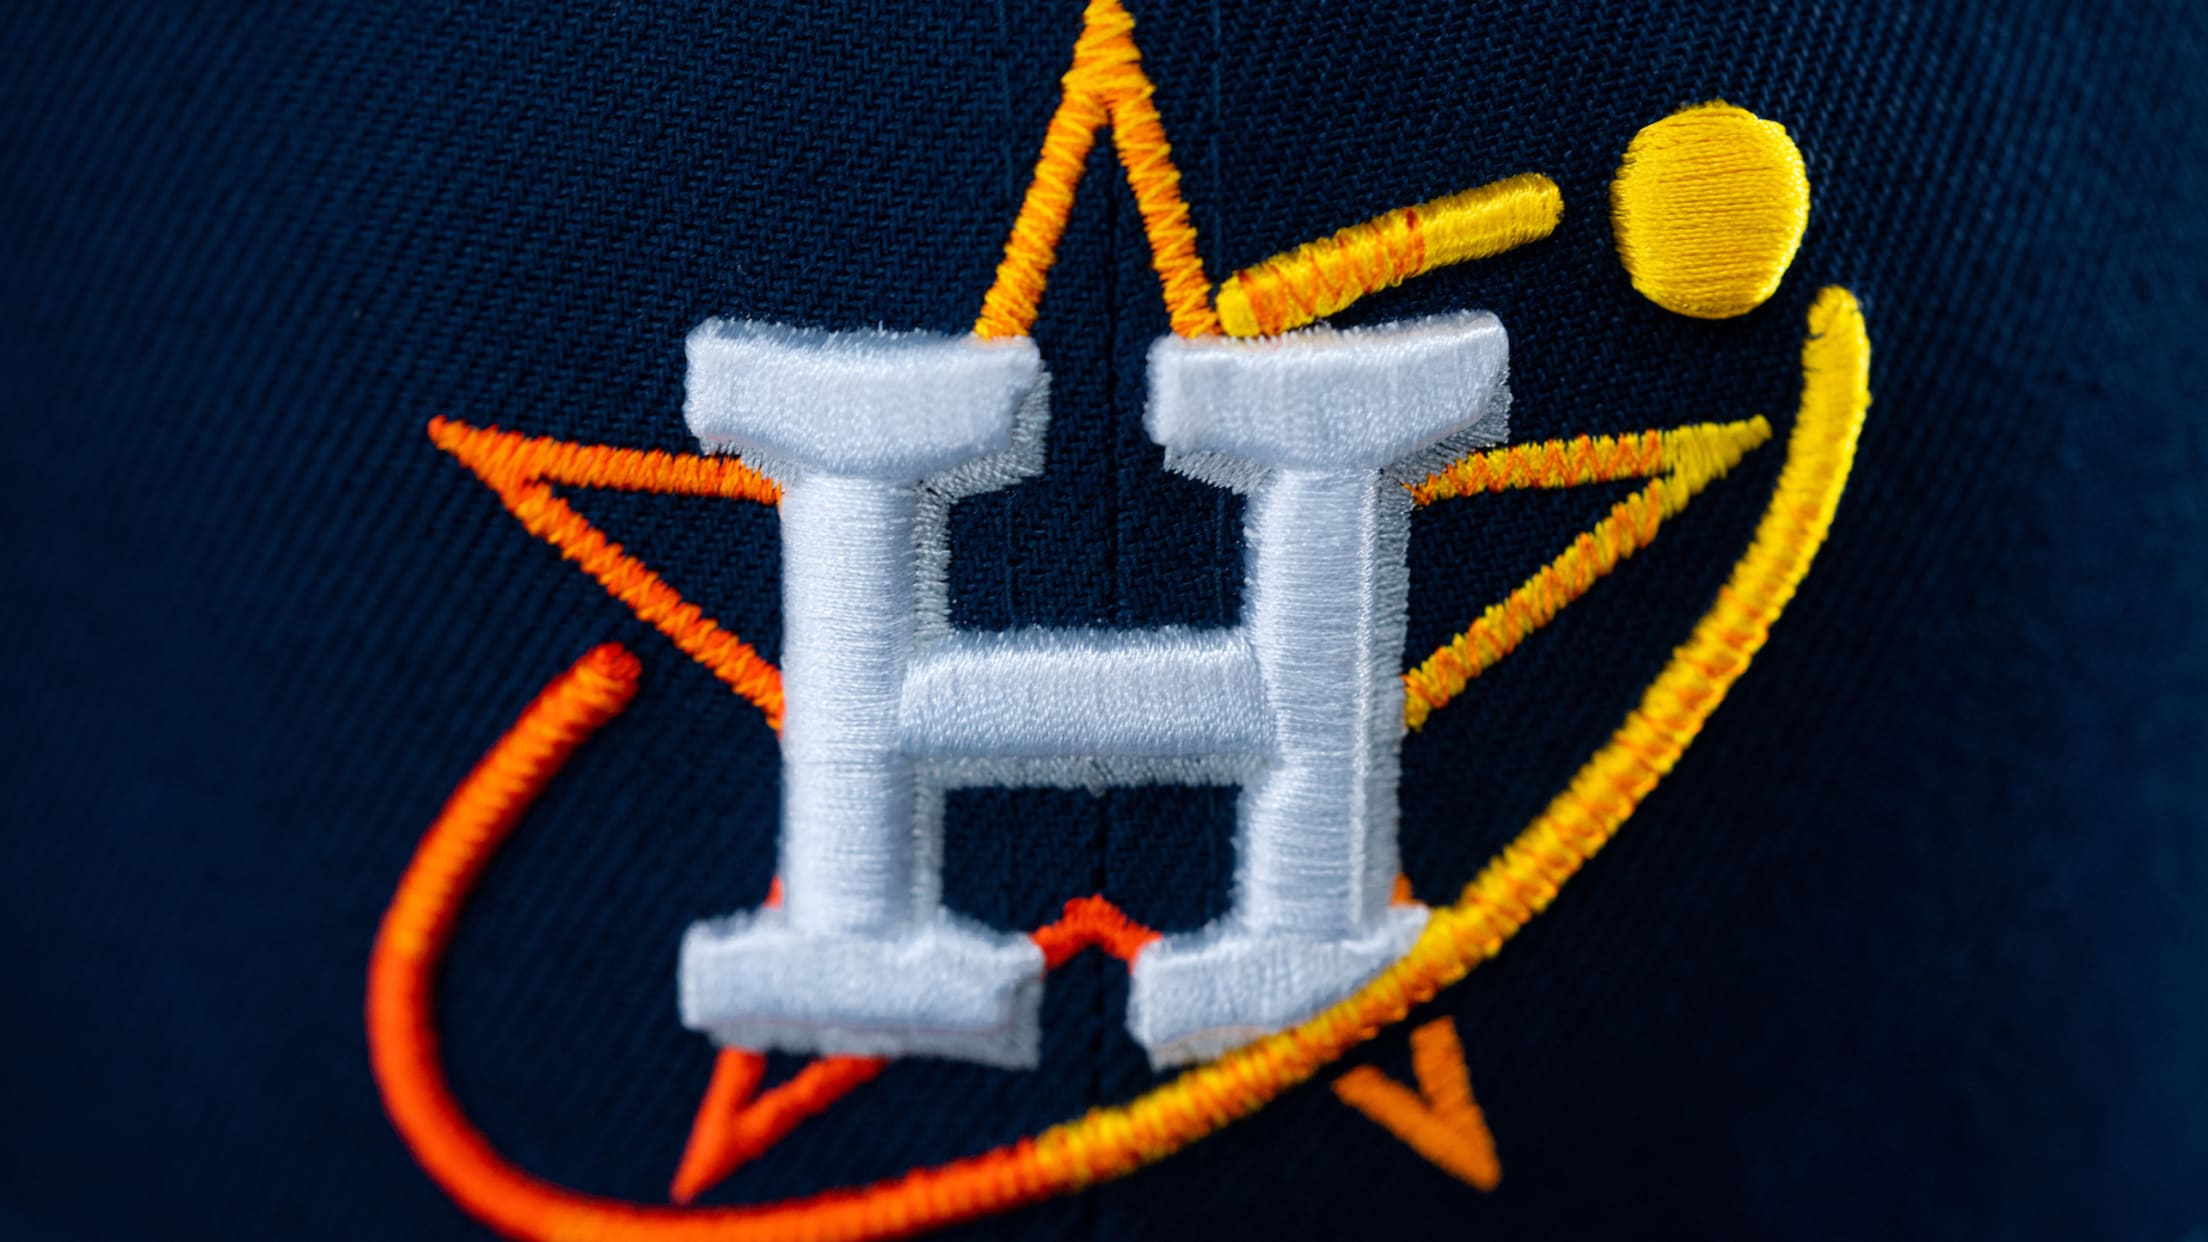 mens space city astros jersey